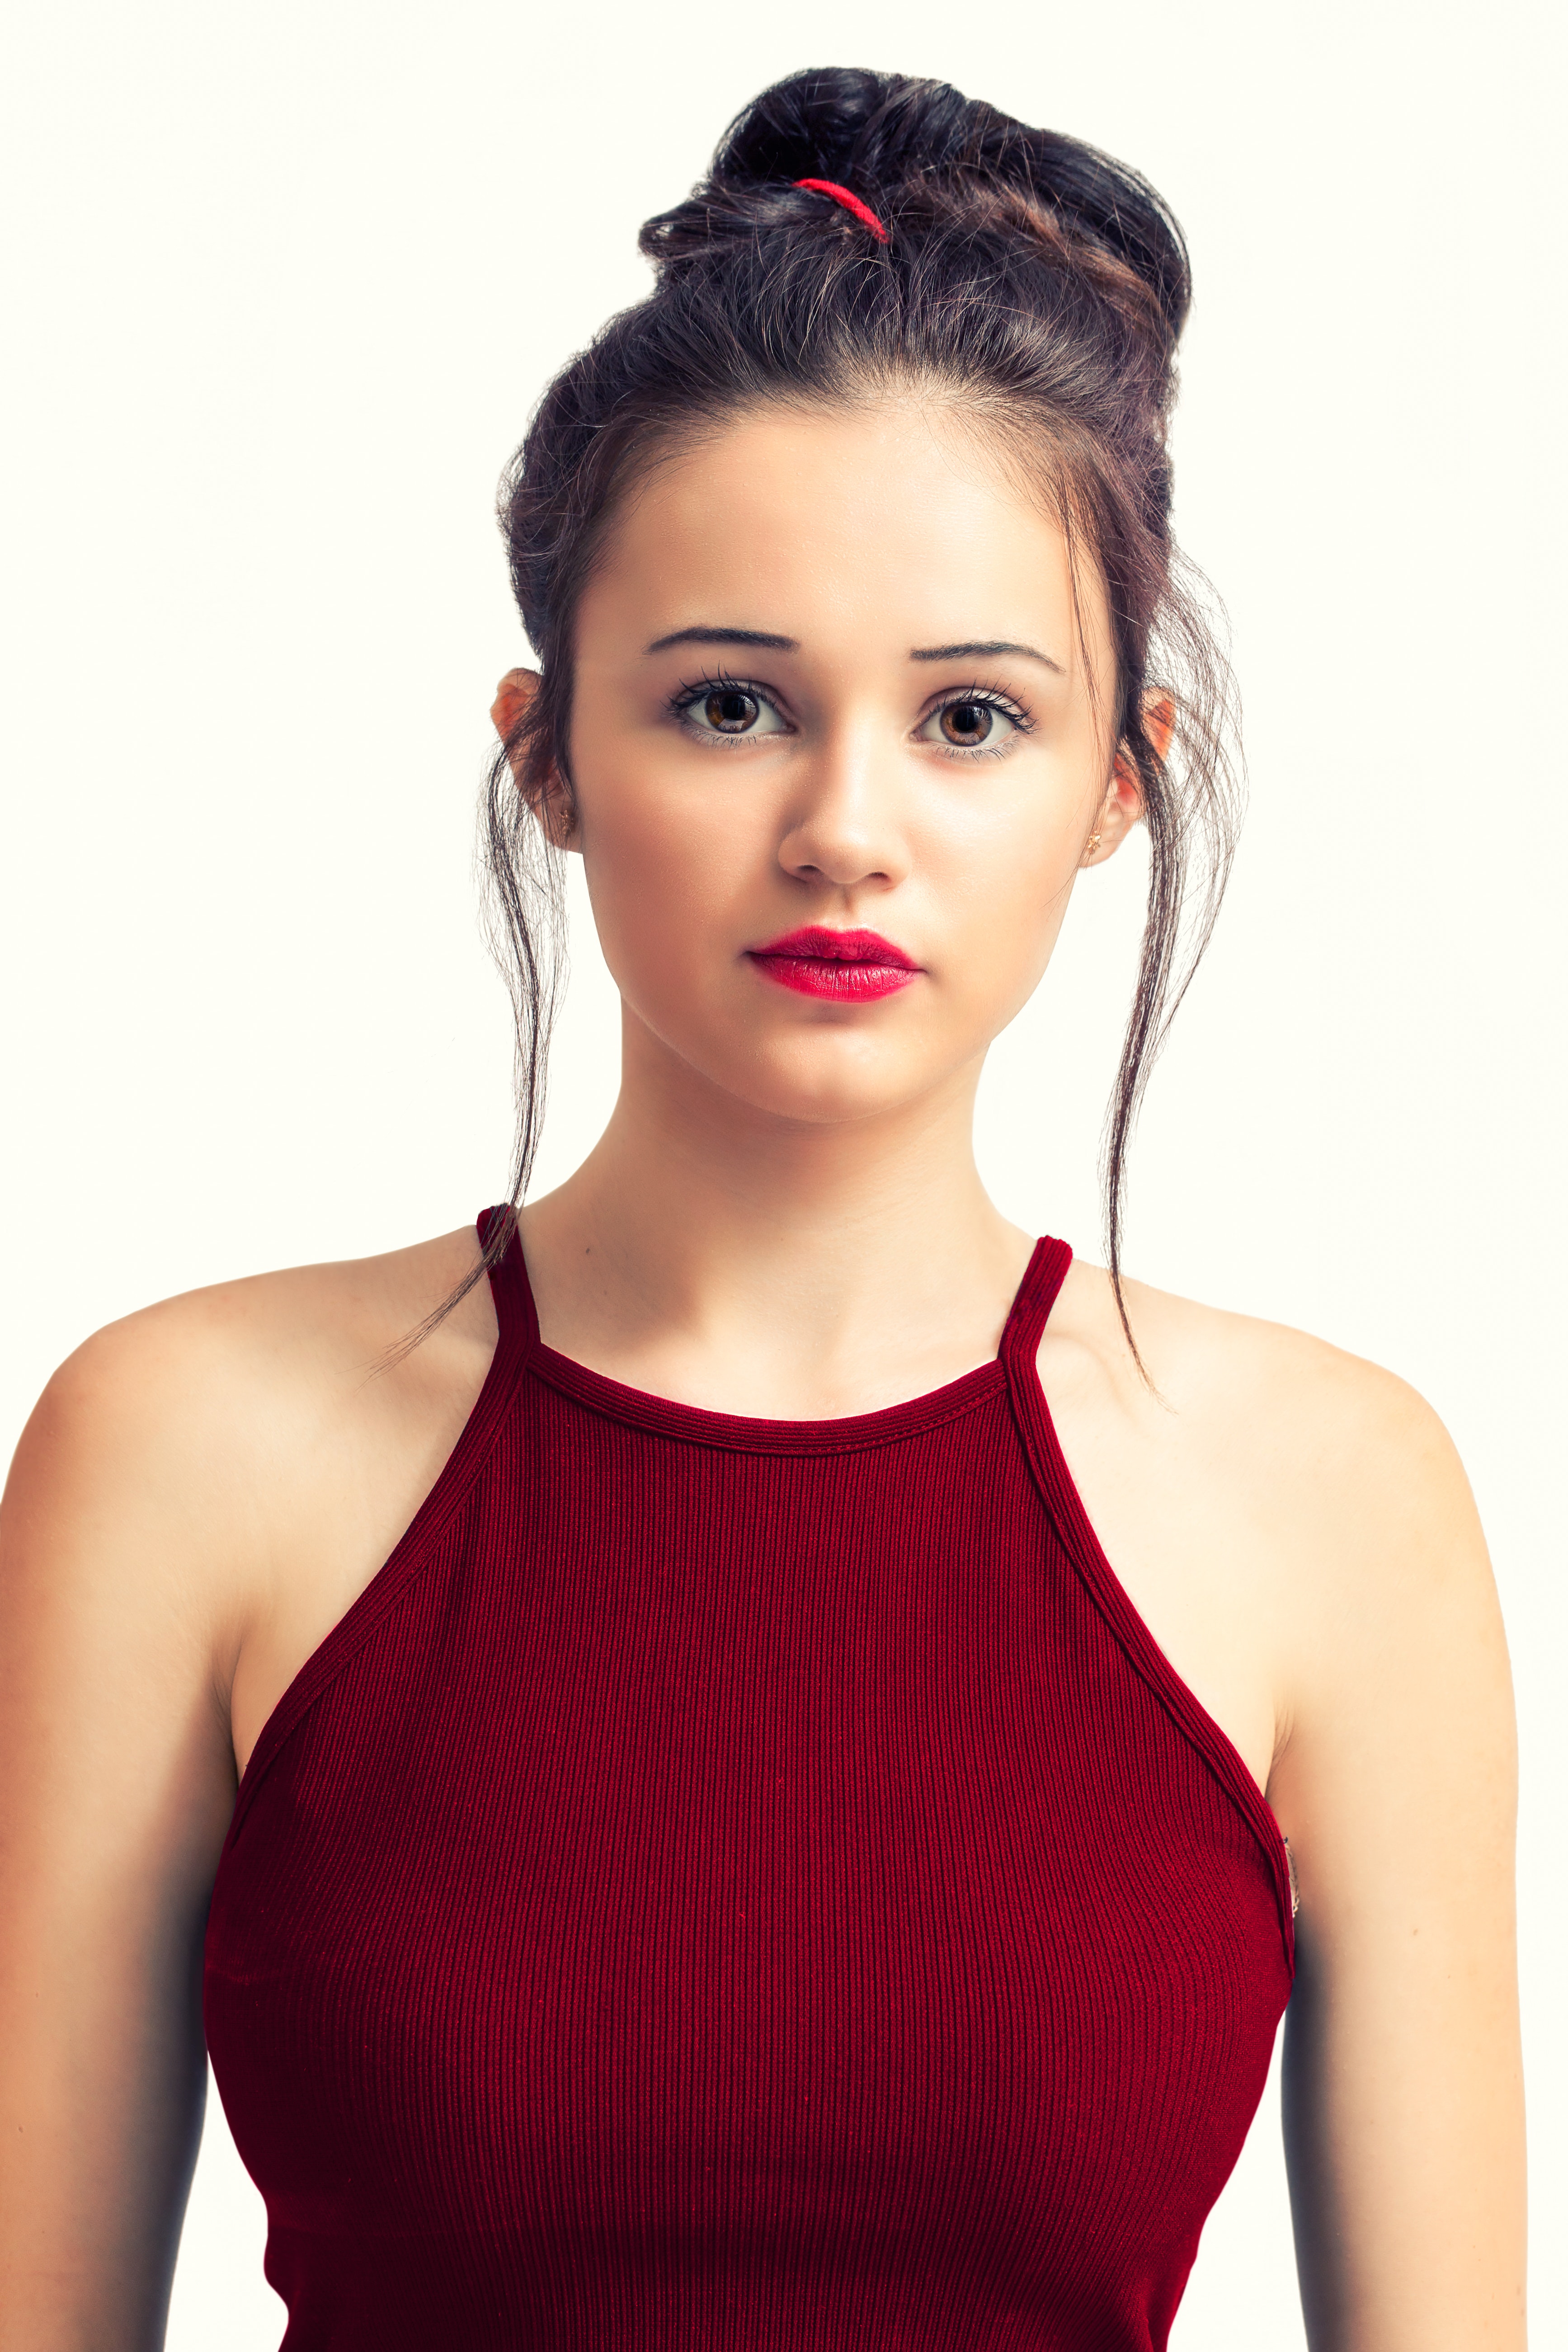 Free photo: Woman in Red Tank Top - Adolescent, Lips, Woman - Free ...